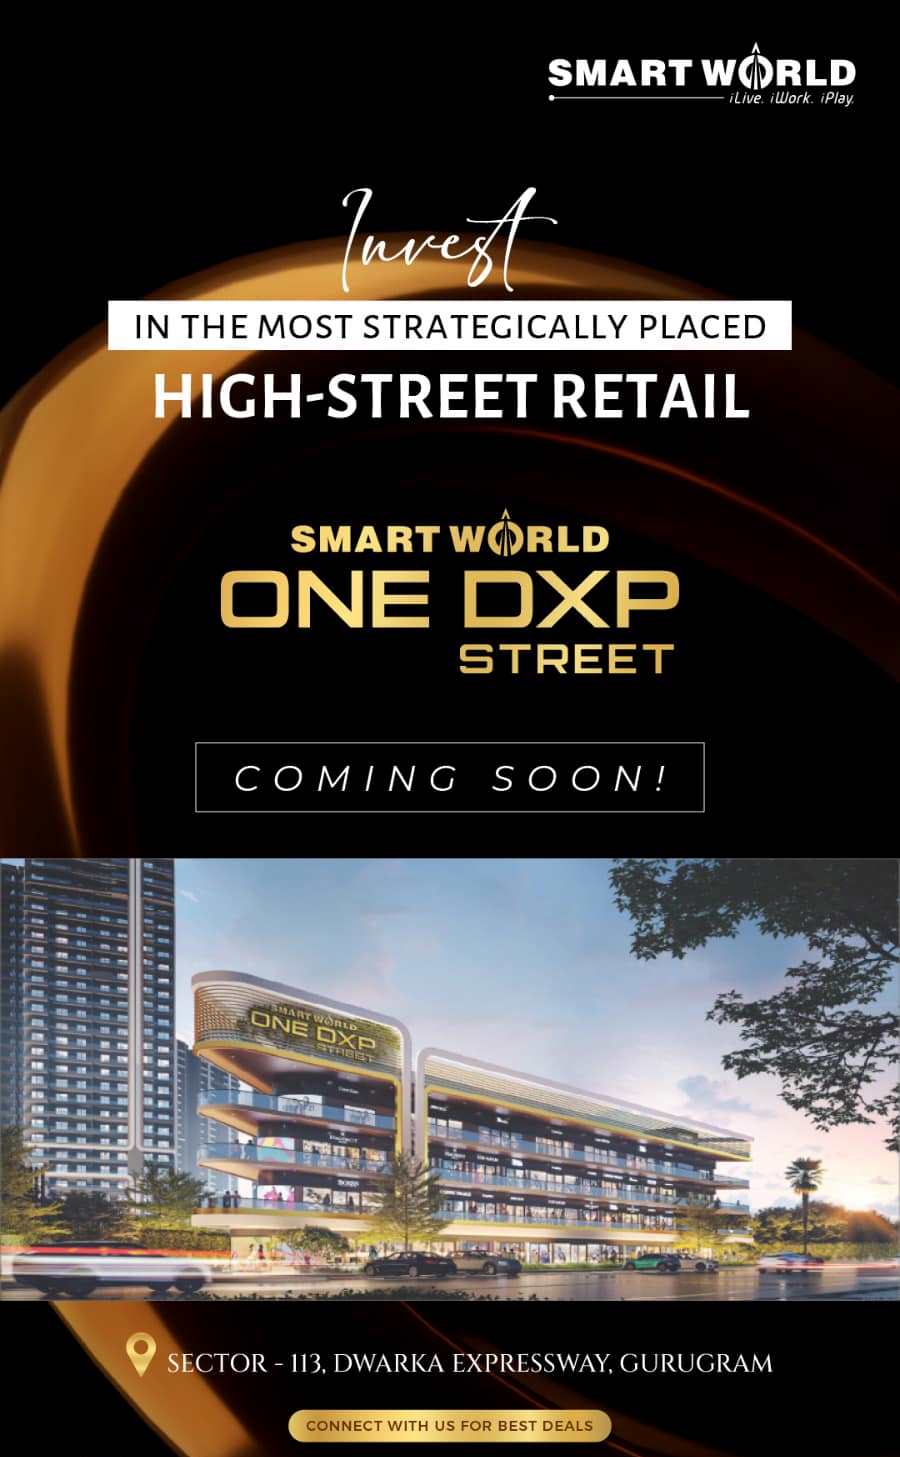 Coming soon at Smart World One Dxp Street in Sector 113, Gurgaon Update